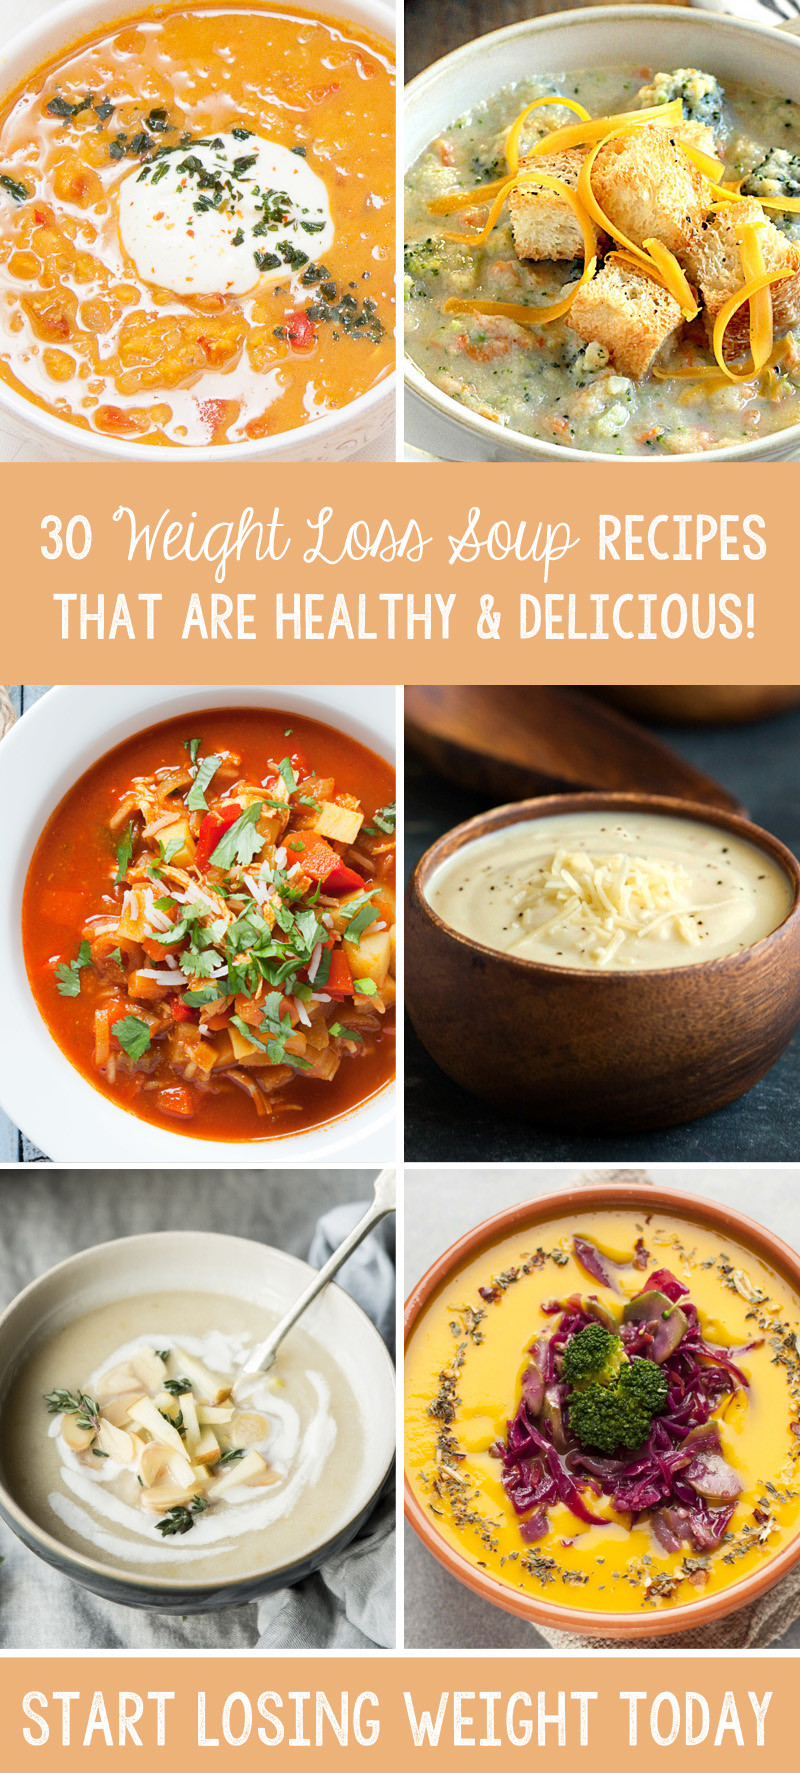 Healthy Canned Soups For Weight Loss
 30 Weight Loss Soup Recipes That Are Healthy & Delicious